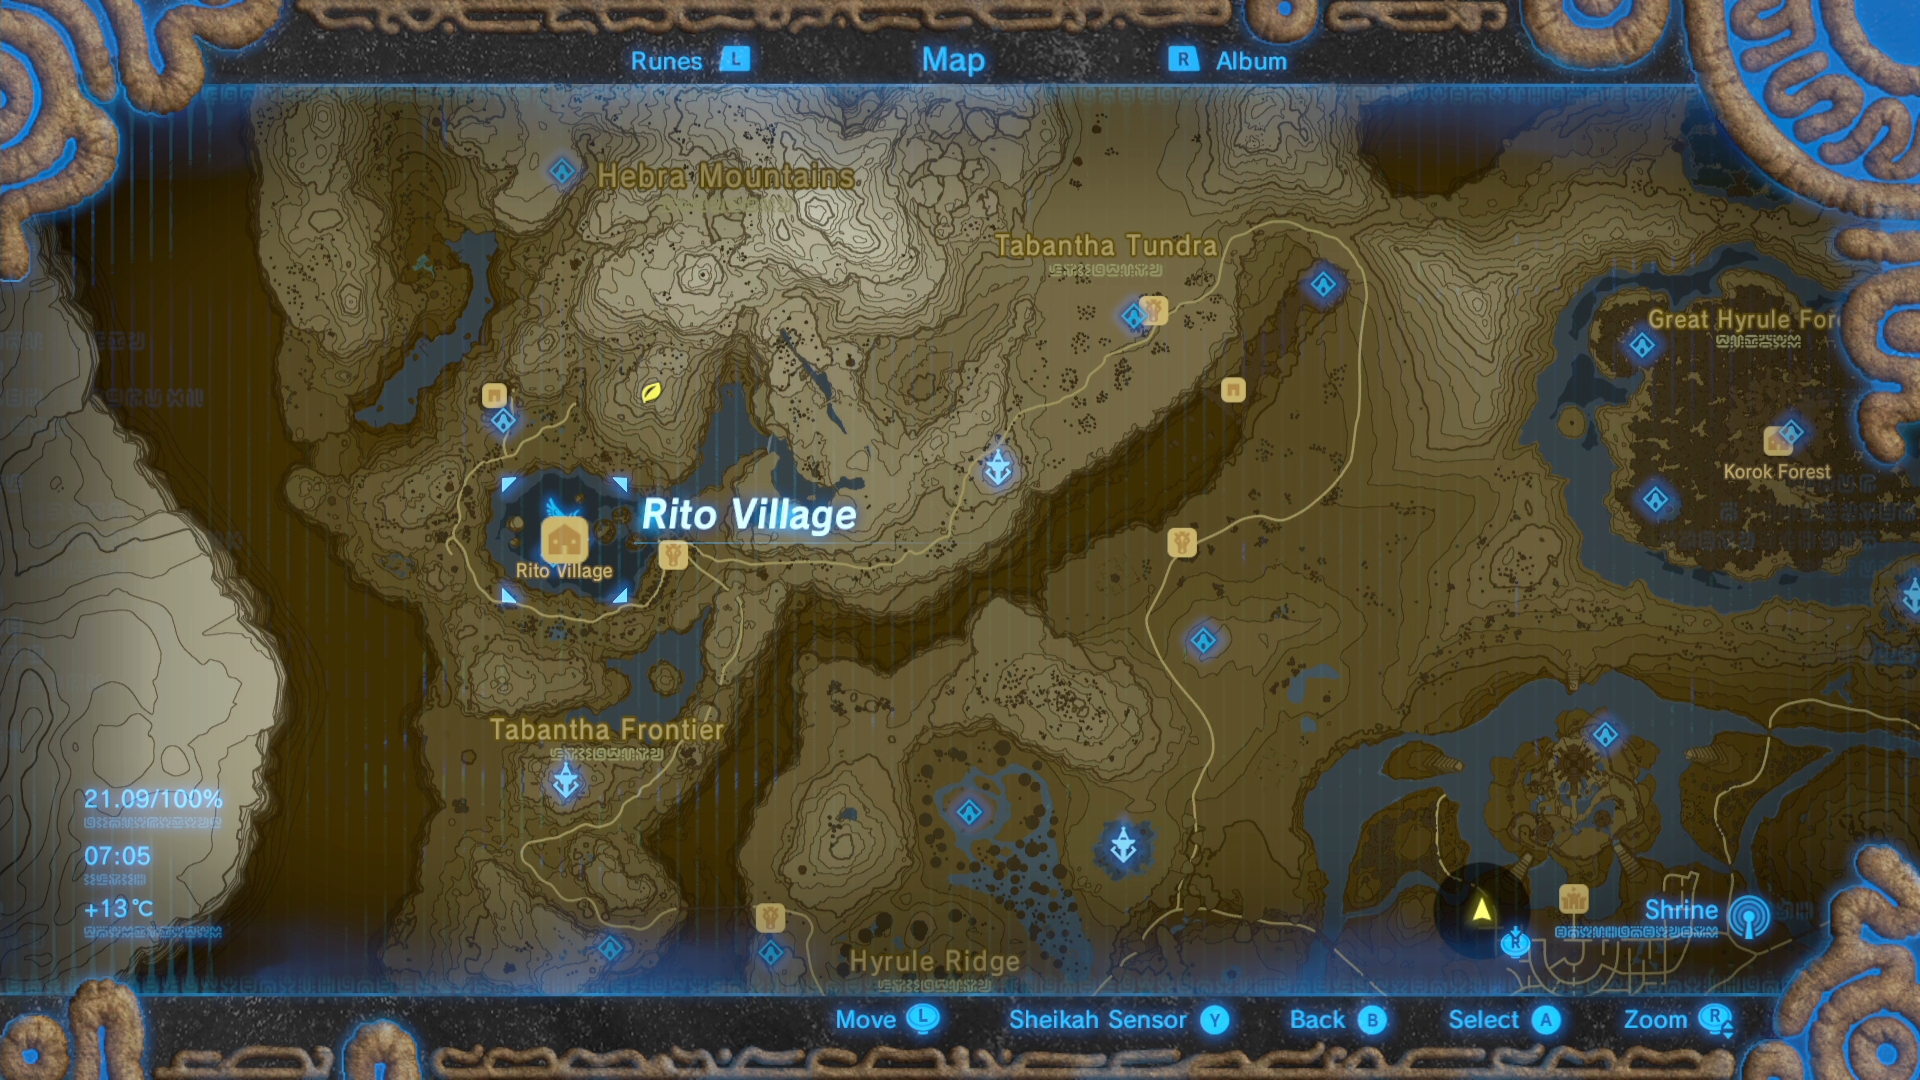 Zelda: Breath of the Wild guide: From the Ground Up side quest walkthrough  - Polygon